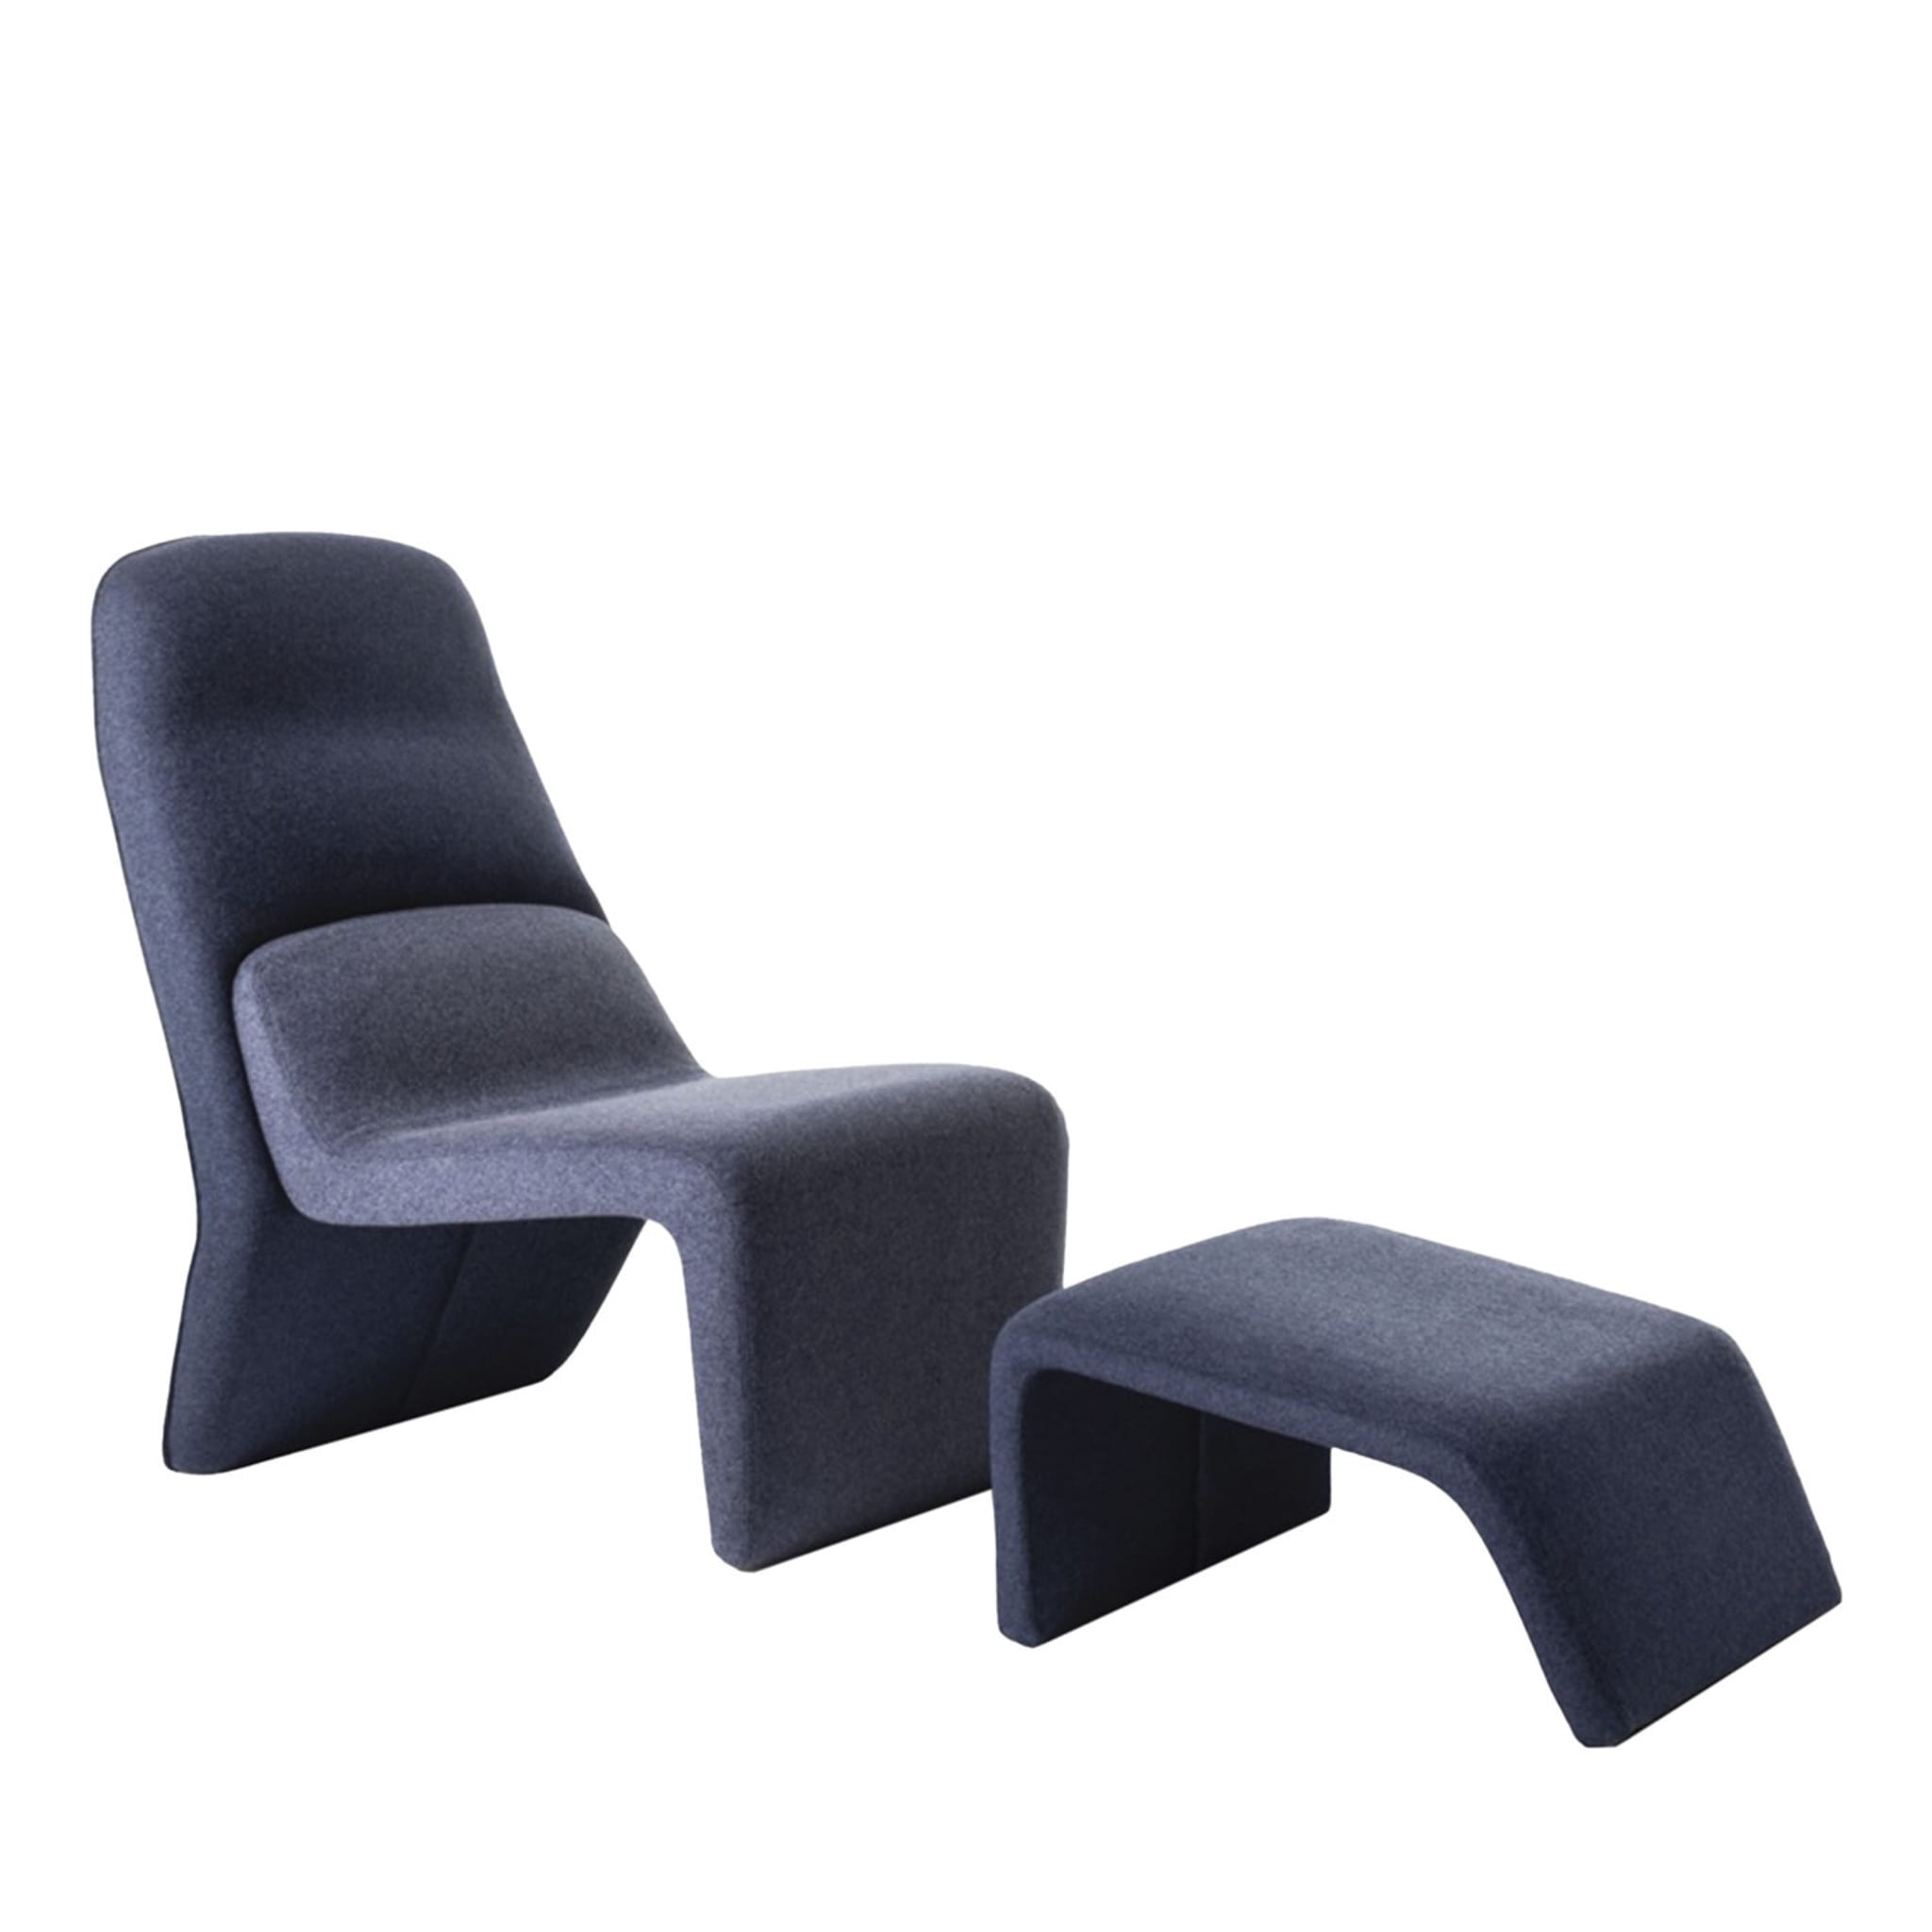 Tape Blue Lounge Chair with Footrest by Radice Orlandini designstudio - Main view